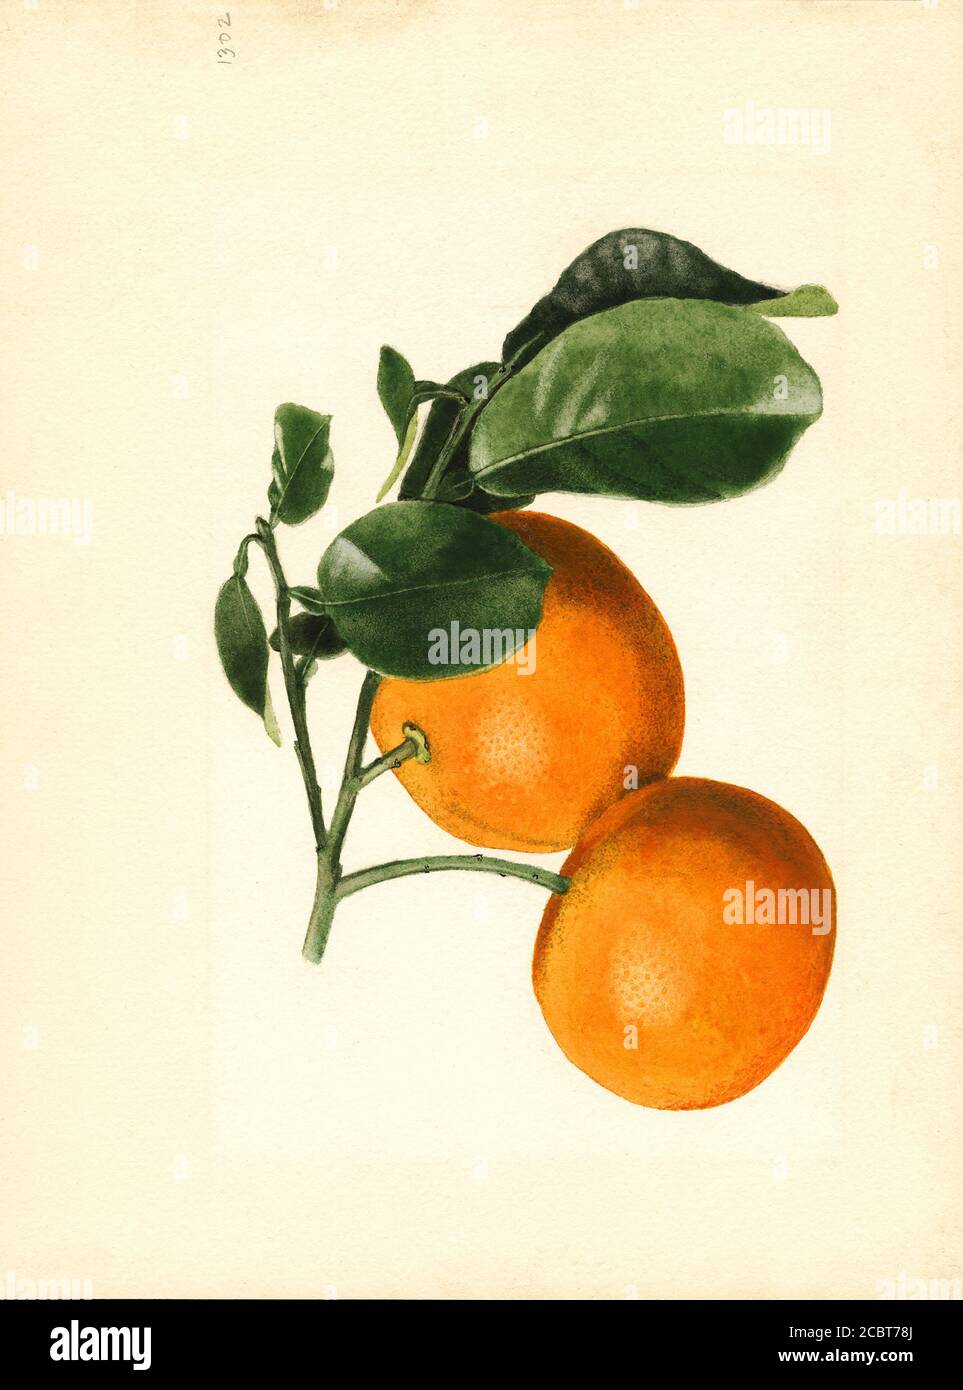 Two Oranges on Branch, Citrus aurantium, Hawthorne, Alachua County, Florida, USA, Watercolor Illustration by James Marion Shull, U.S. Department of Agriculture Pomological Watercolor Collection, 1923 Stock Photo